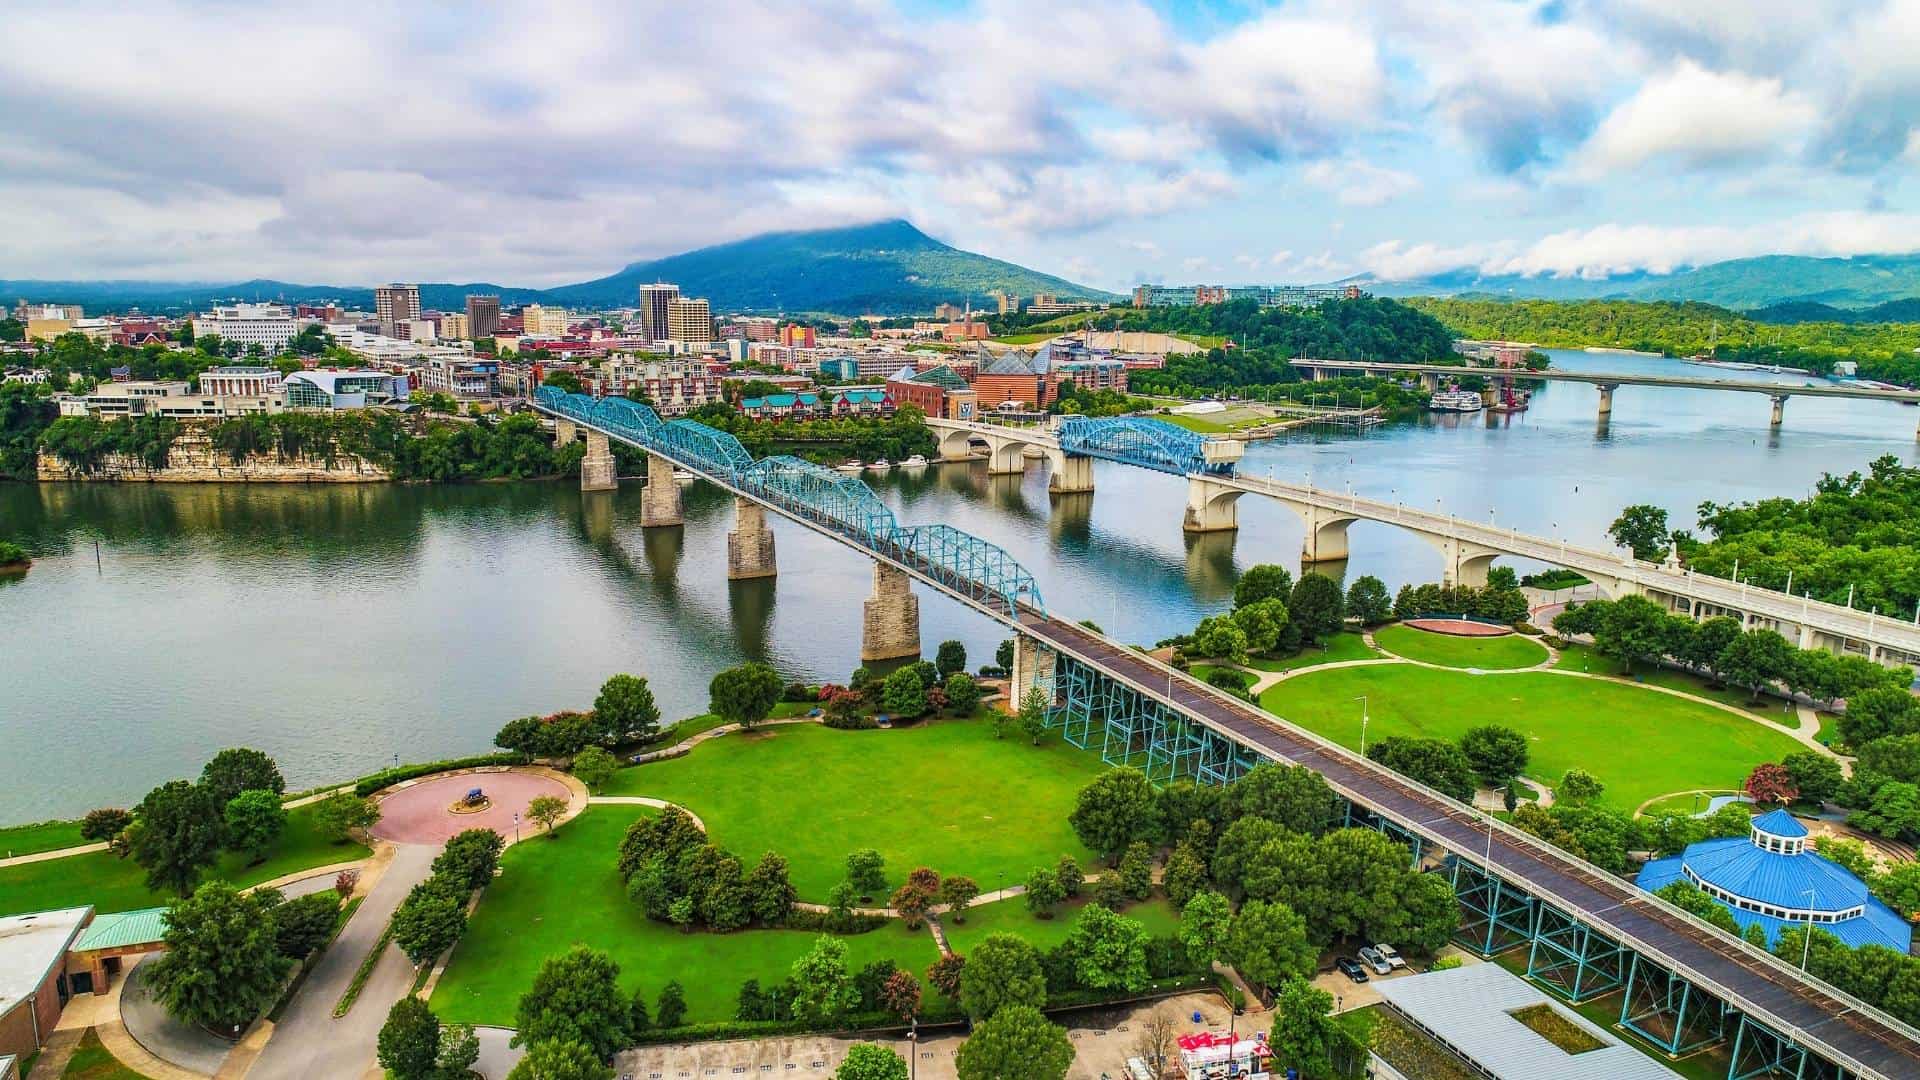 The 10 Absolute Best Things to do in Chattanooga with Kids